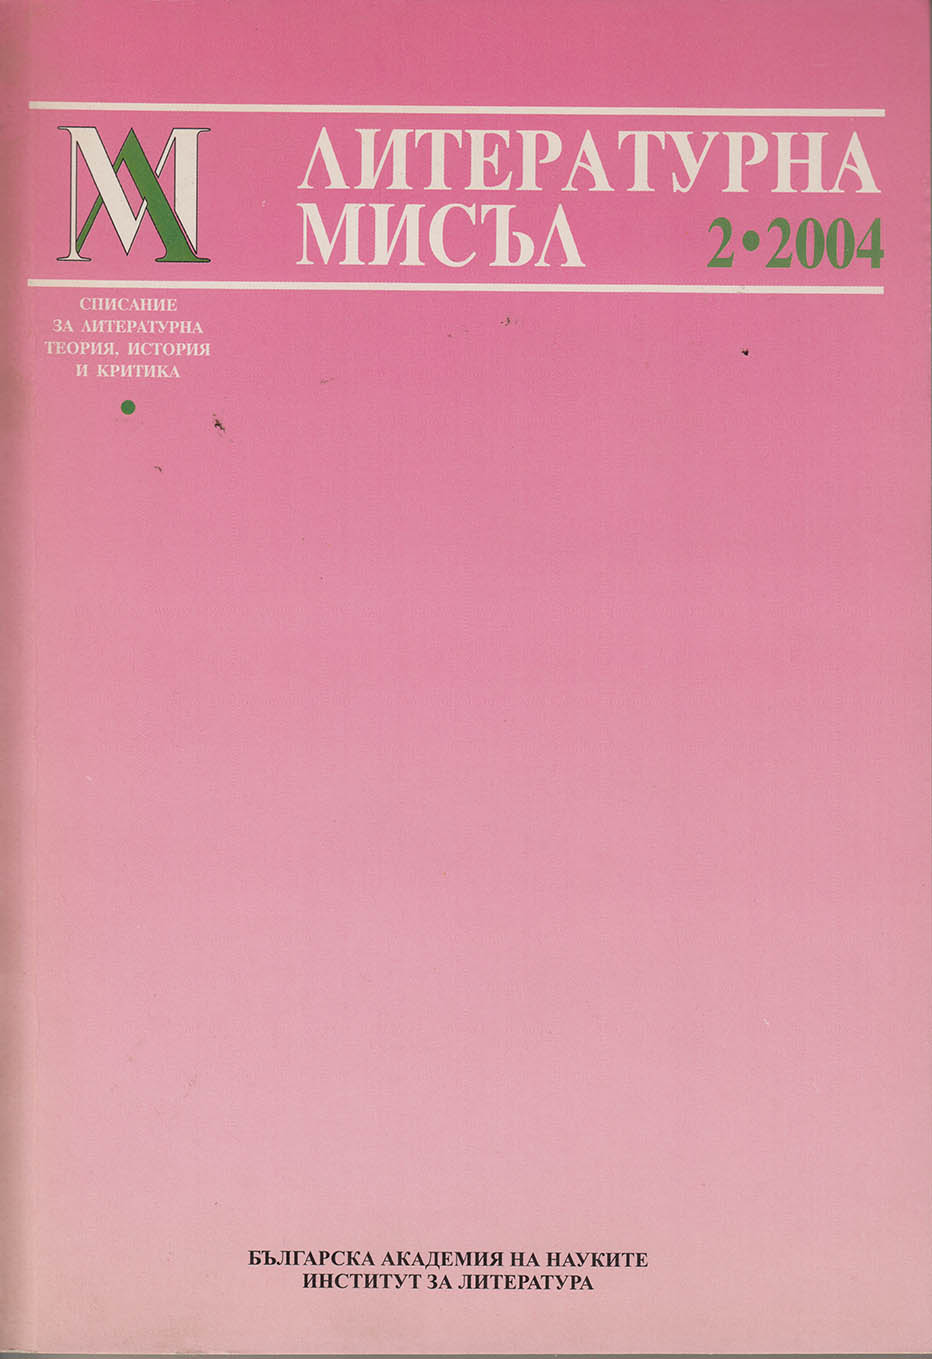 Ivan D. Shishmanov and the disciplinary matrix of Bulgarian national revival’s researches Cover Image